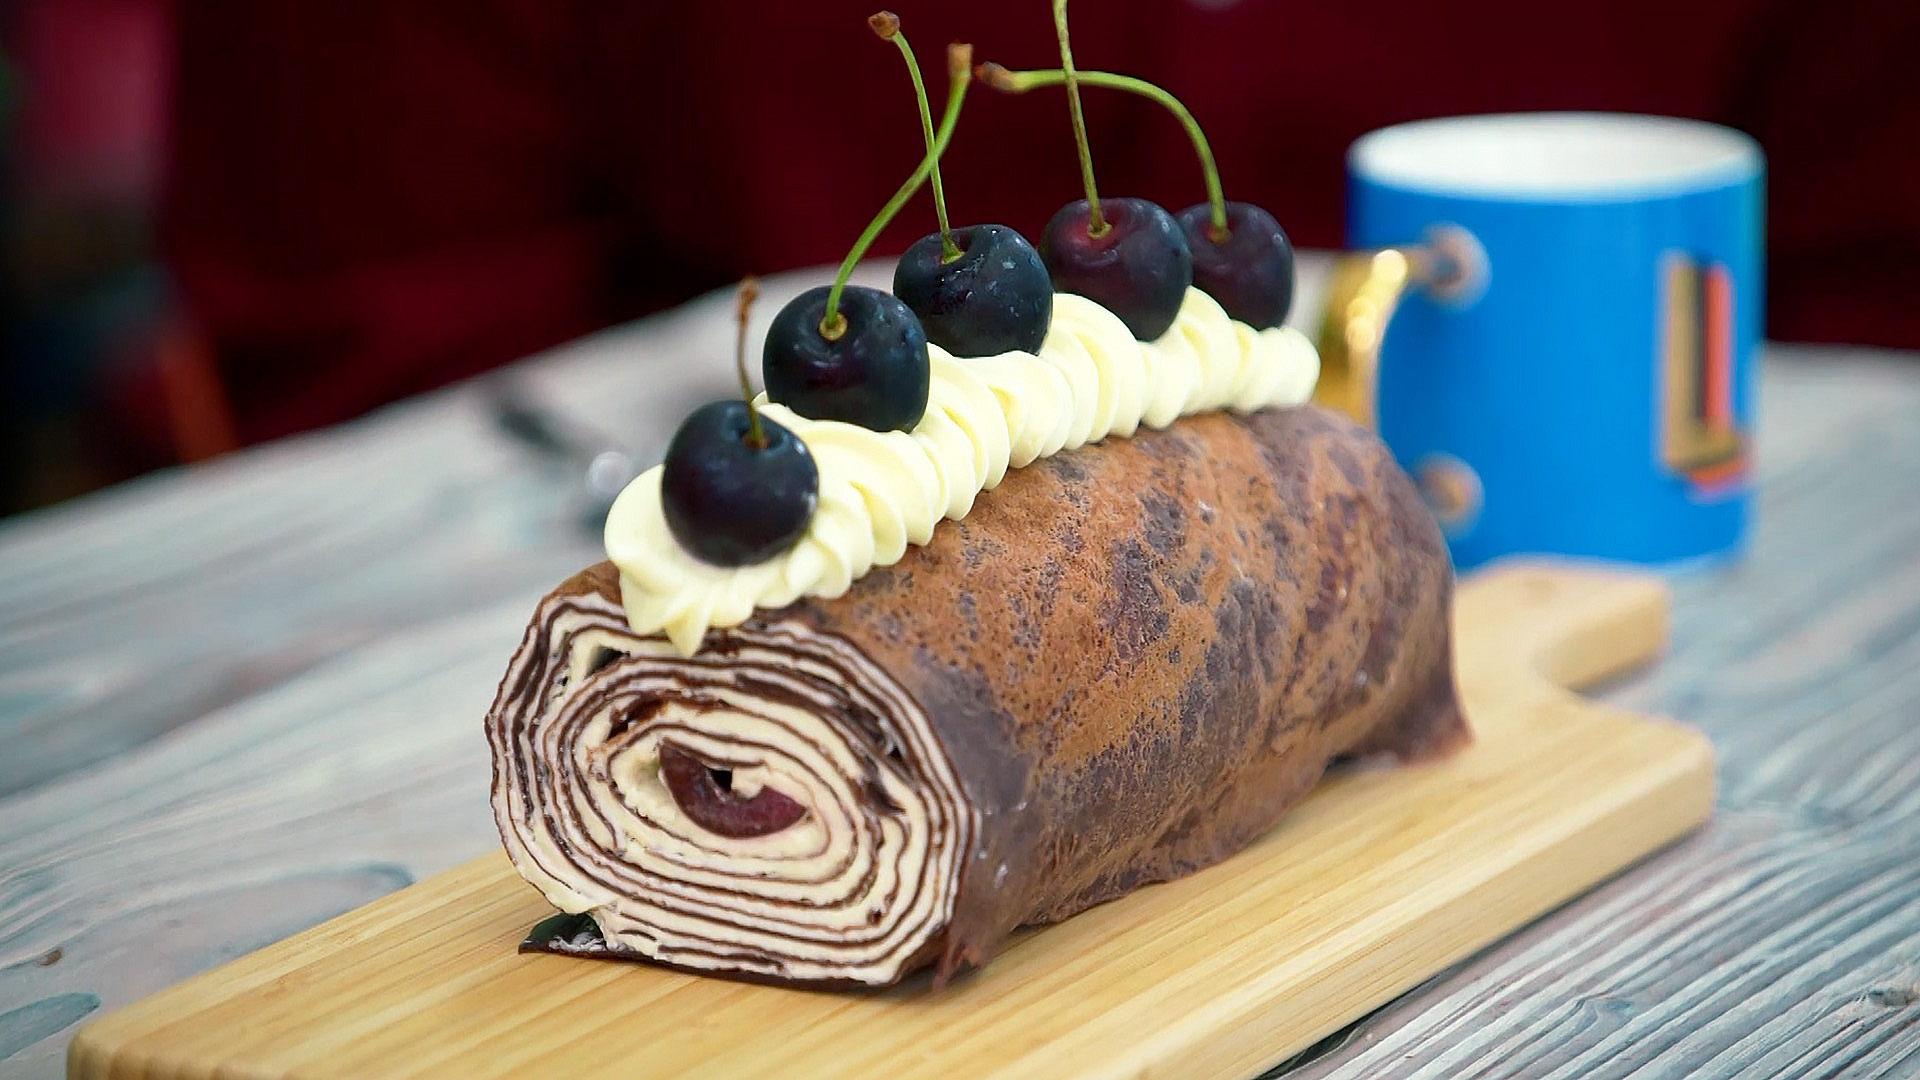 Liam Charles's Crepe Roll - The Great British Bake Off